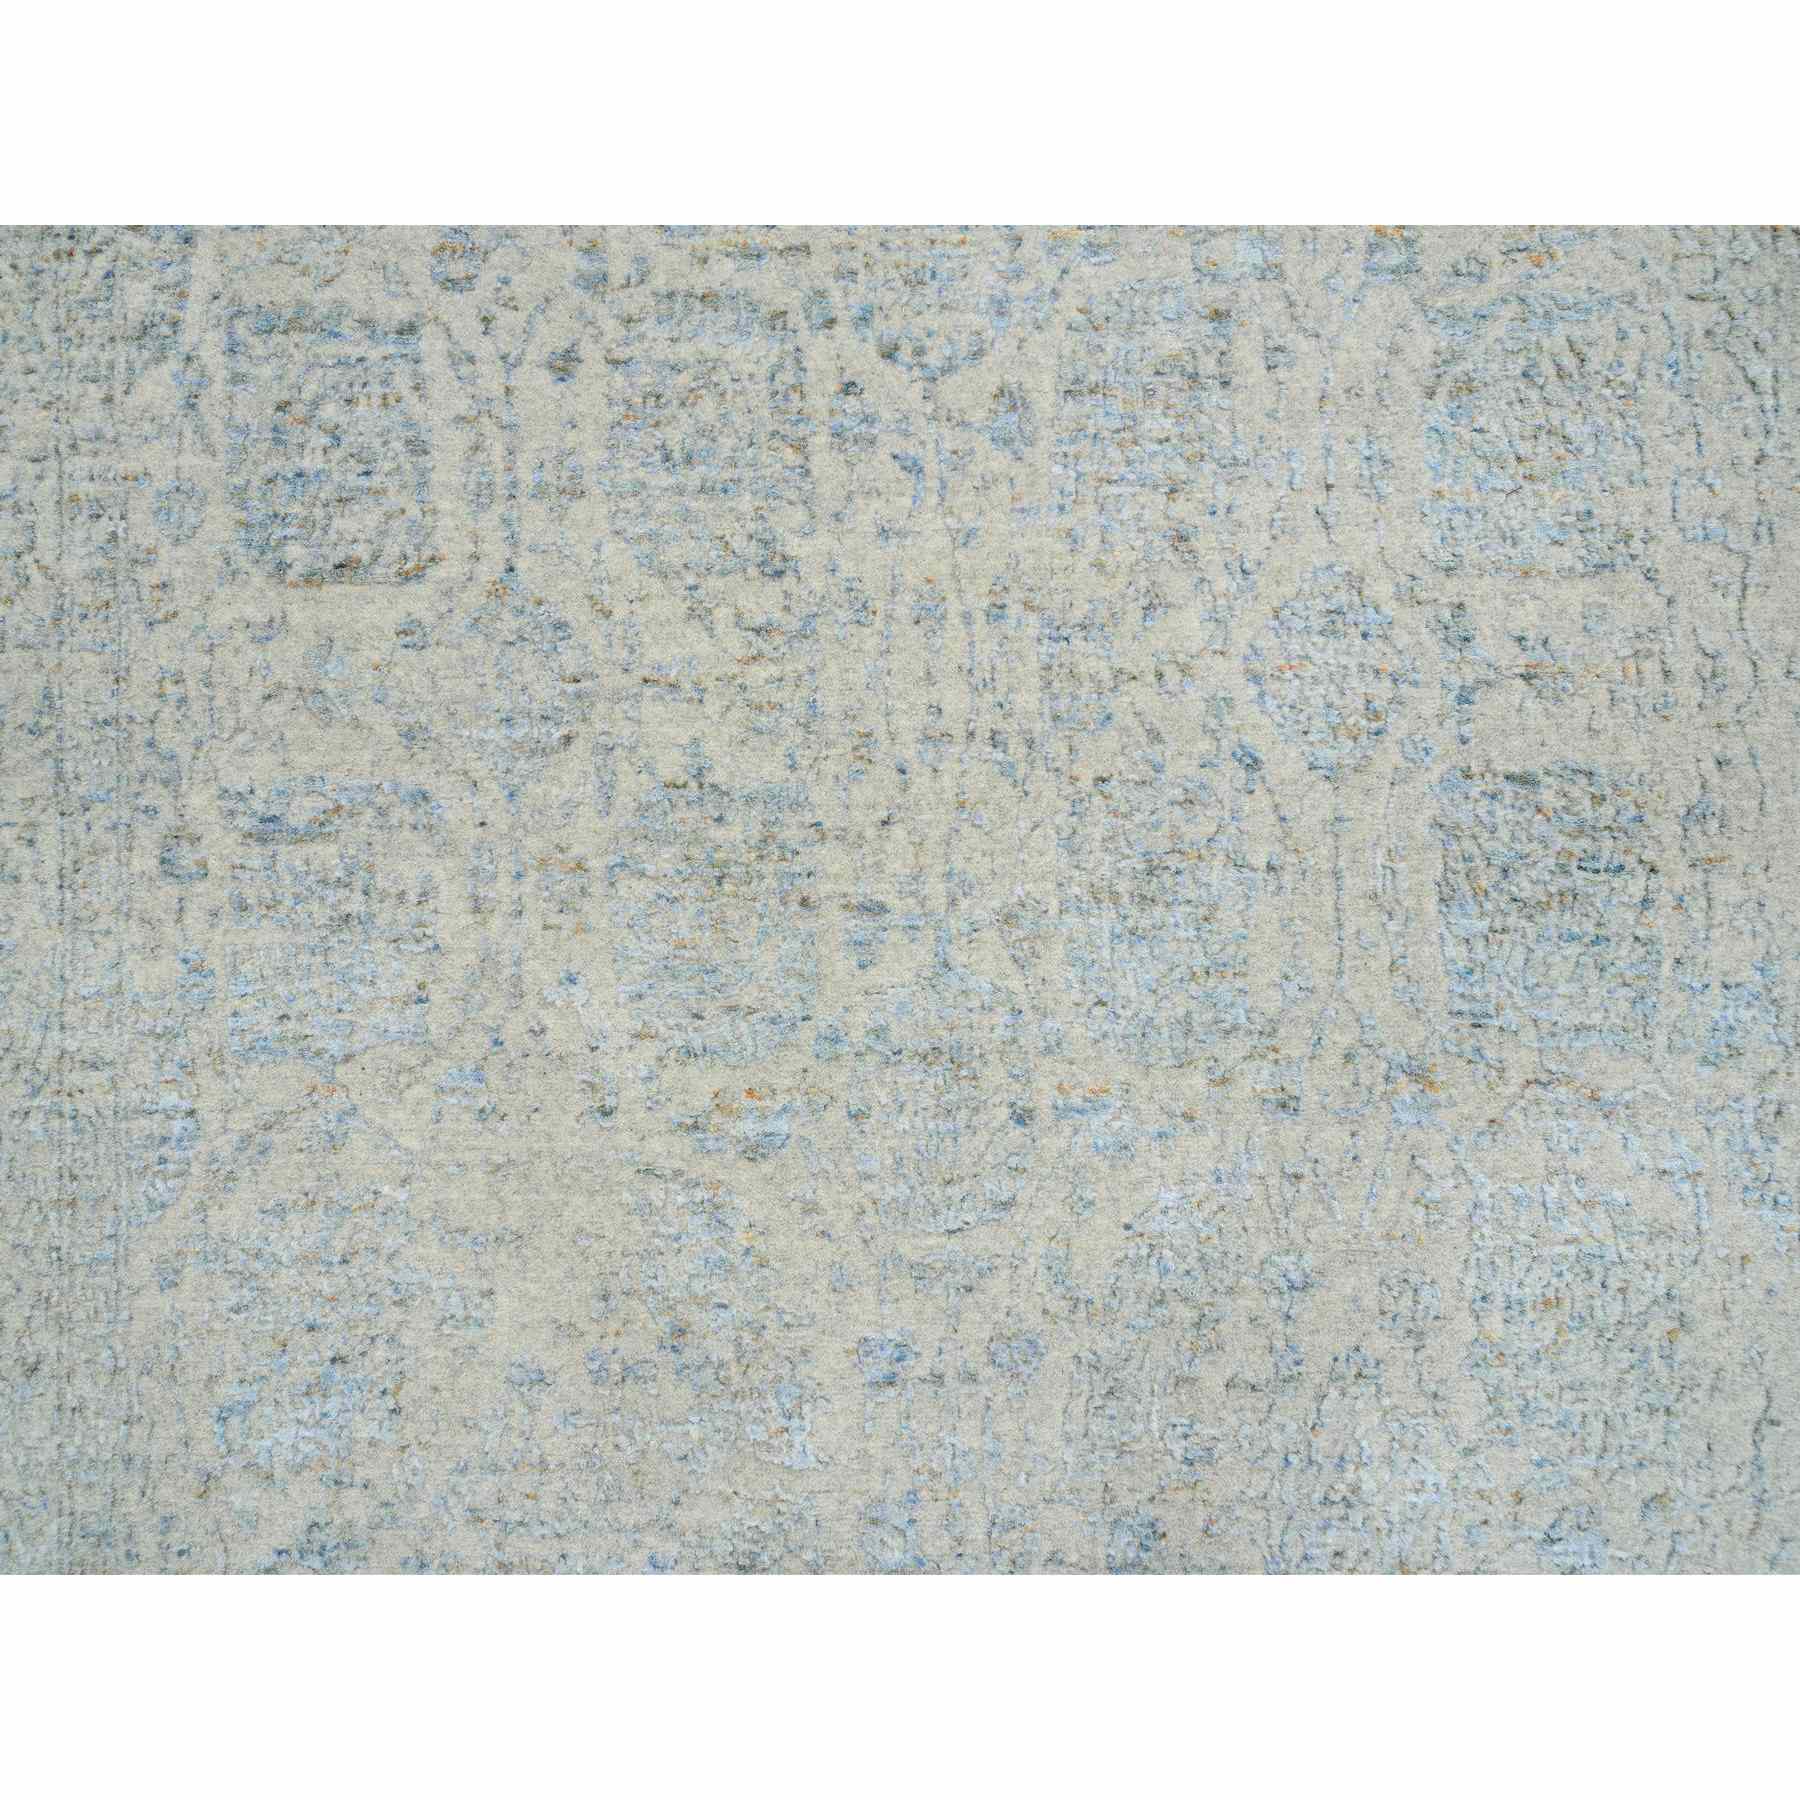 Transitional-Hand-Loomed-Rug-322745